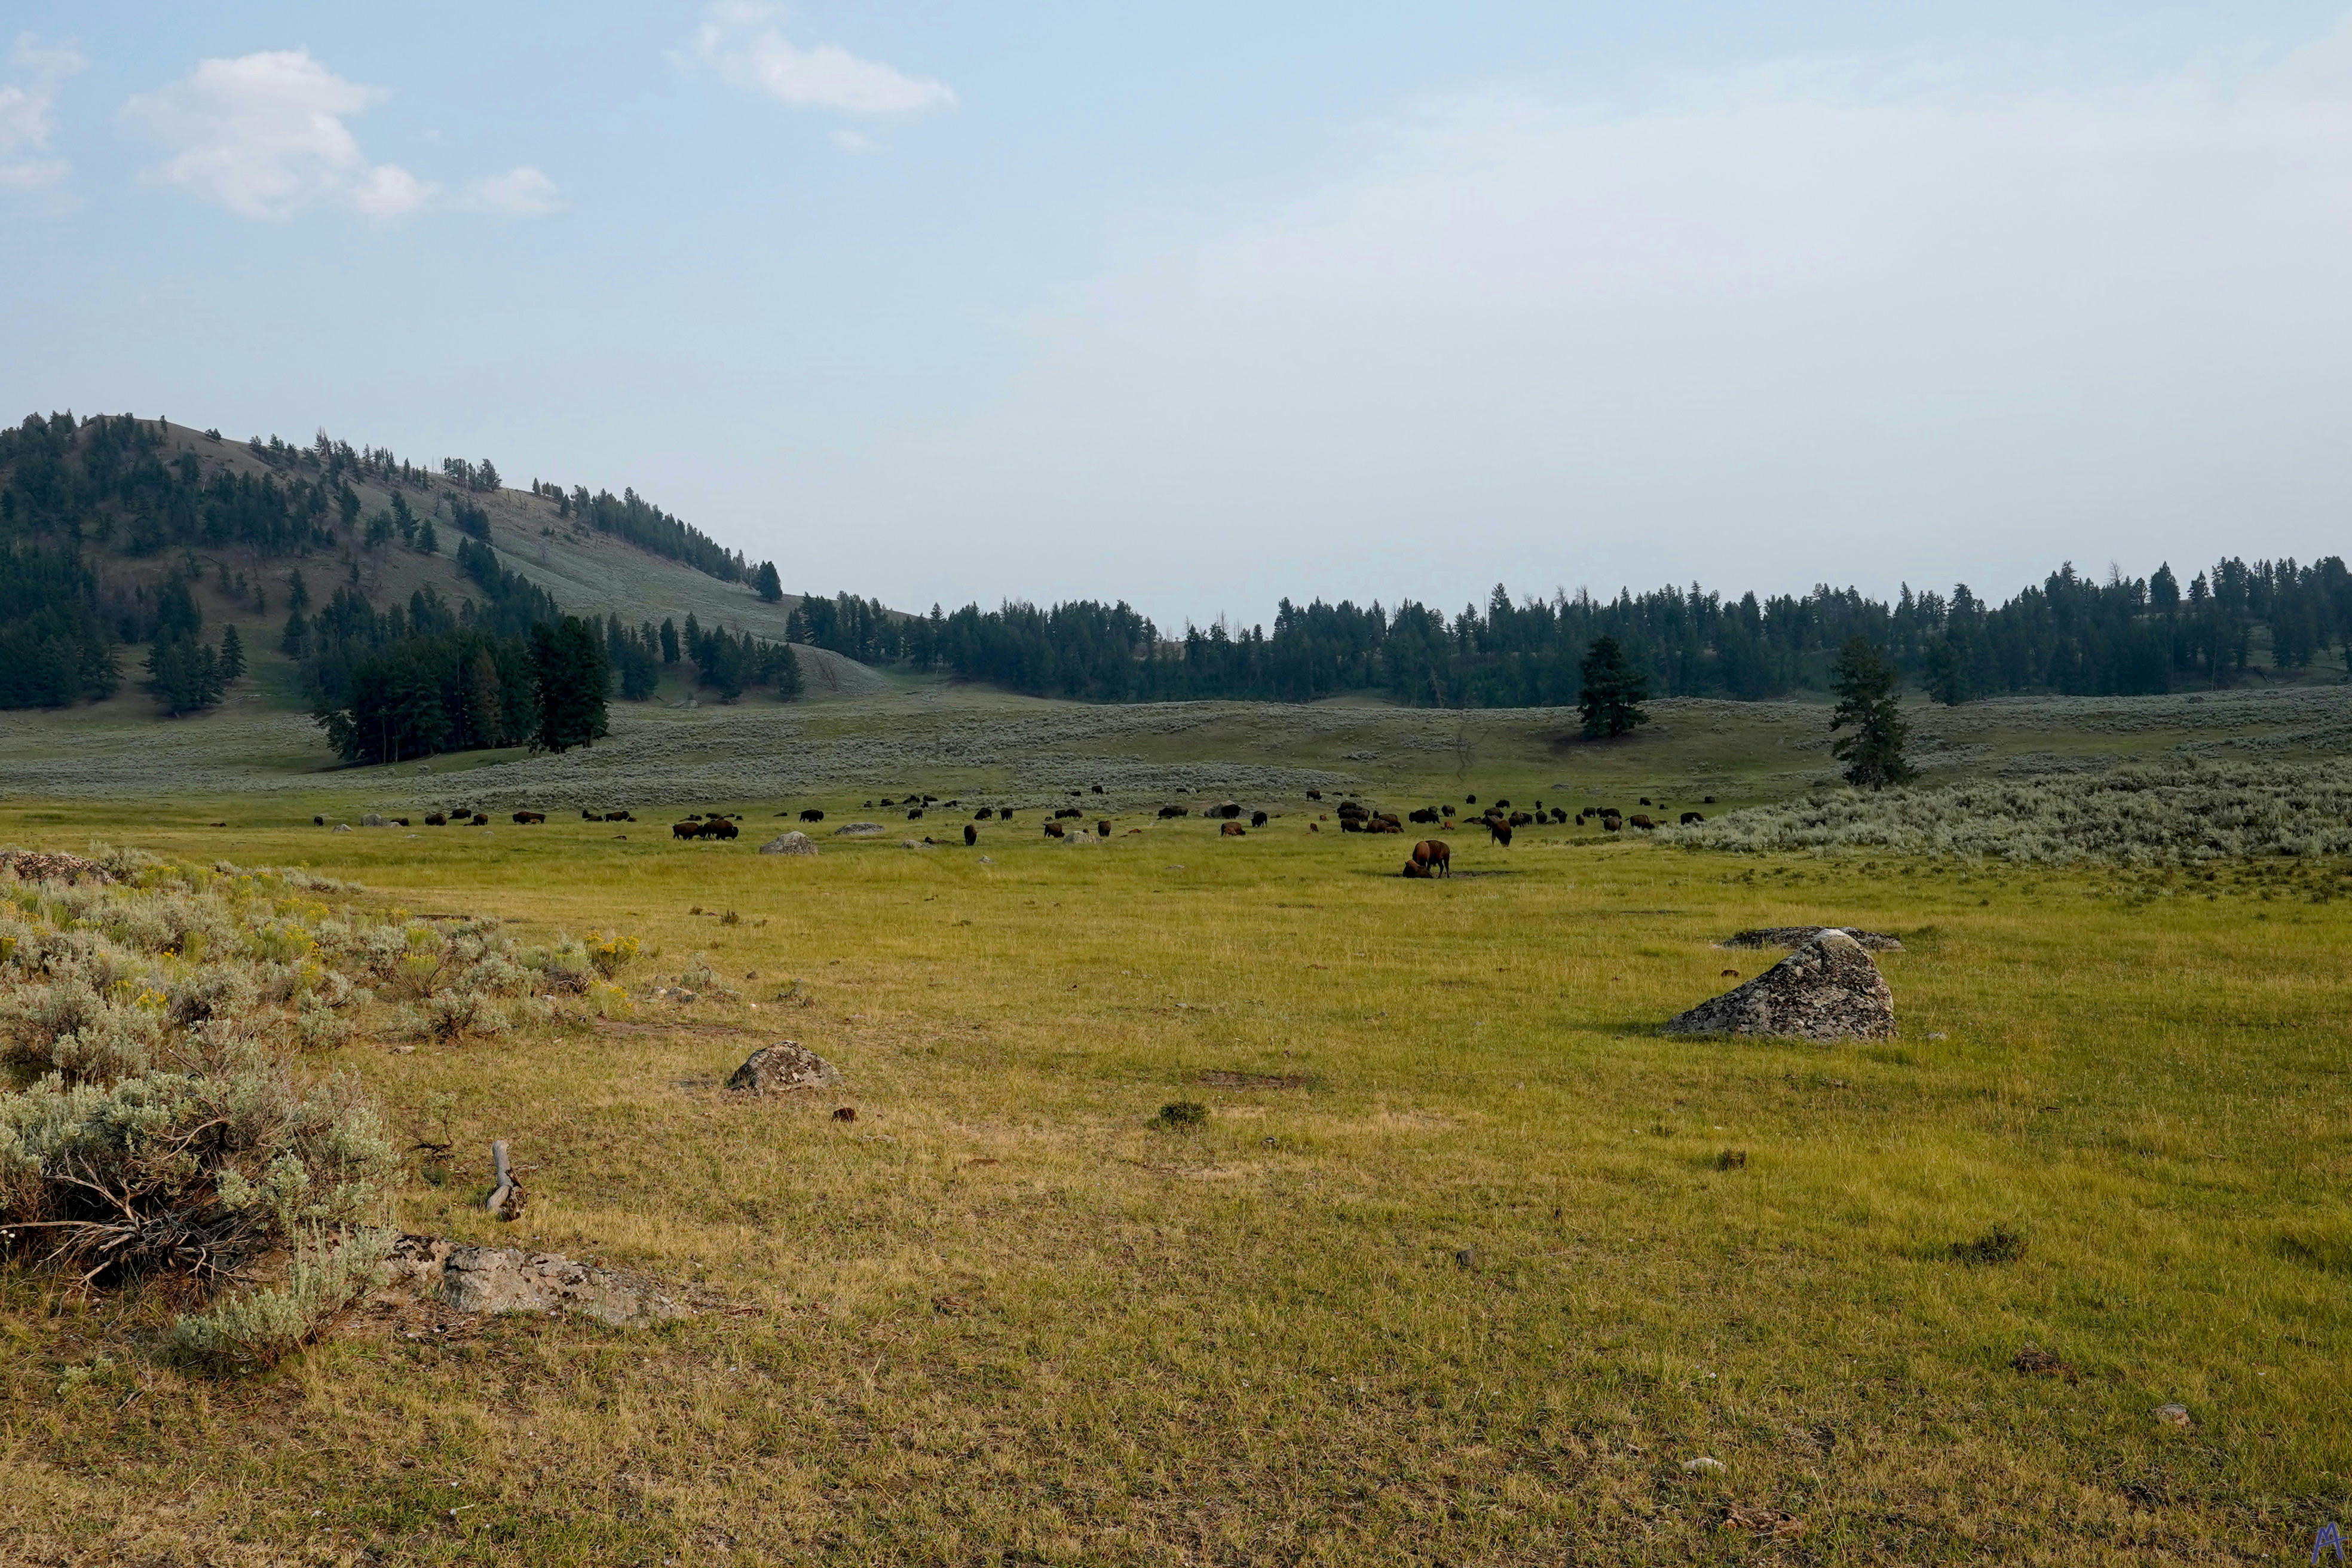 Many bison in green field near trees at Yellowstone